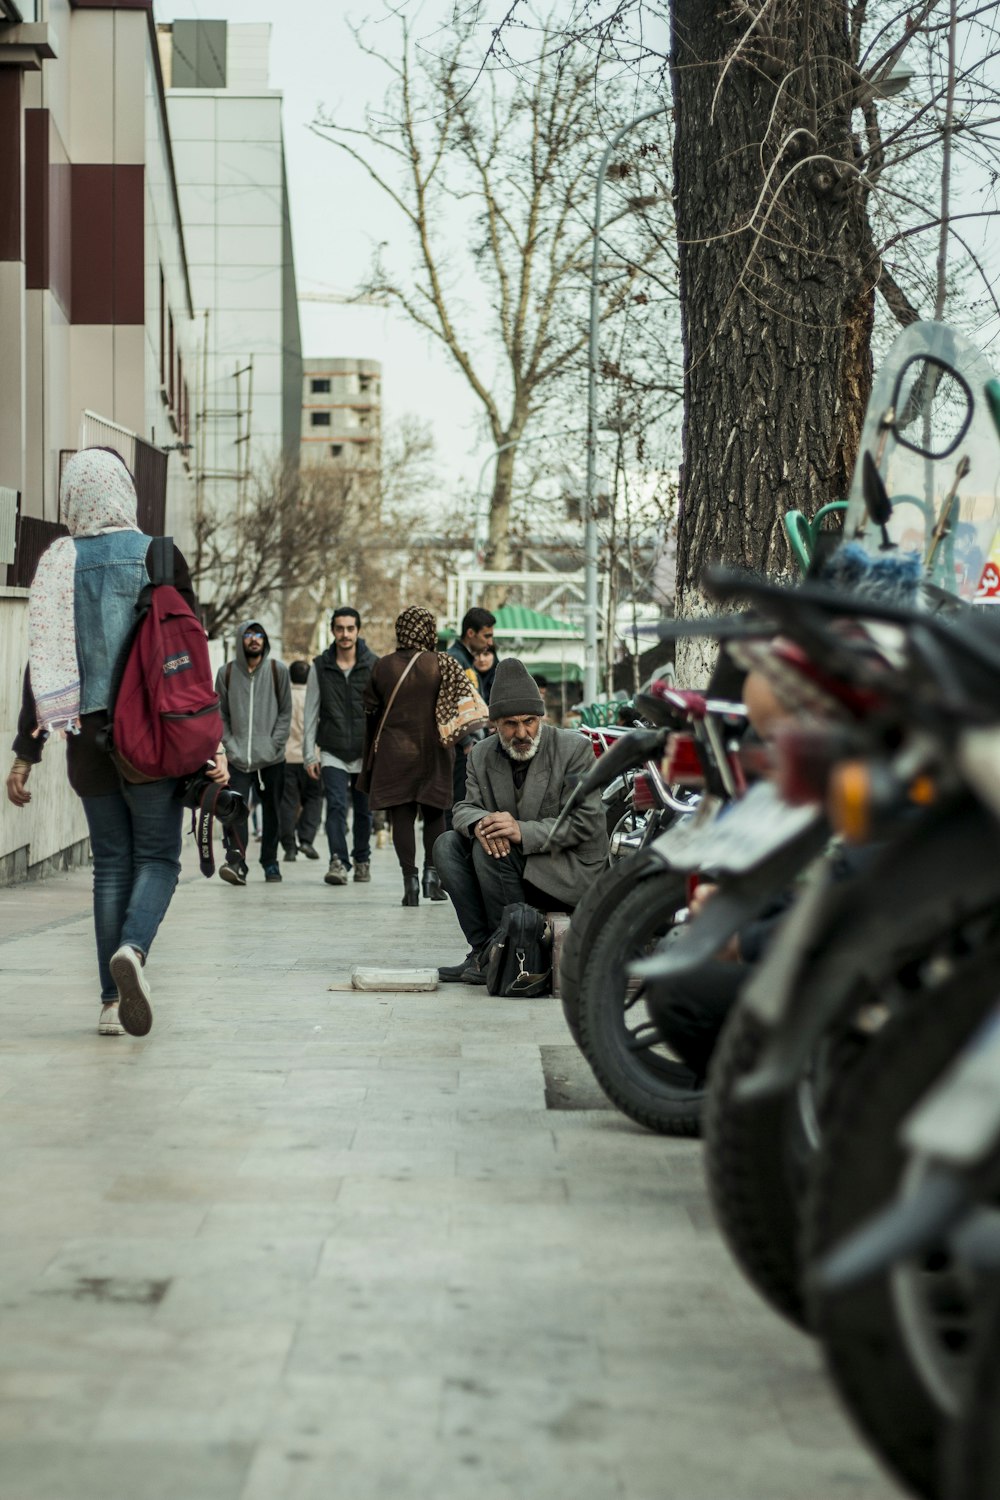 a group of people walking down a sidewalk next to parked motorcycles